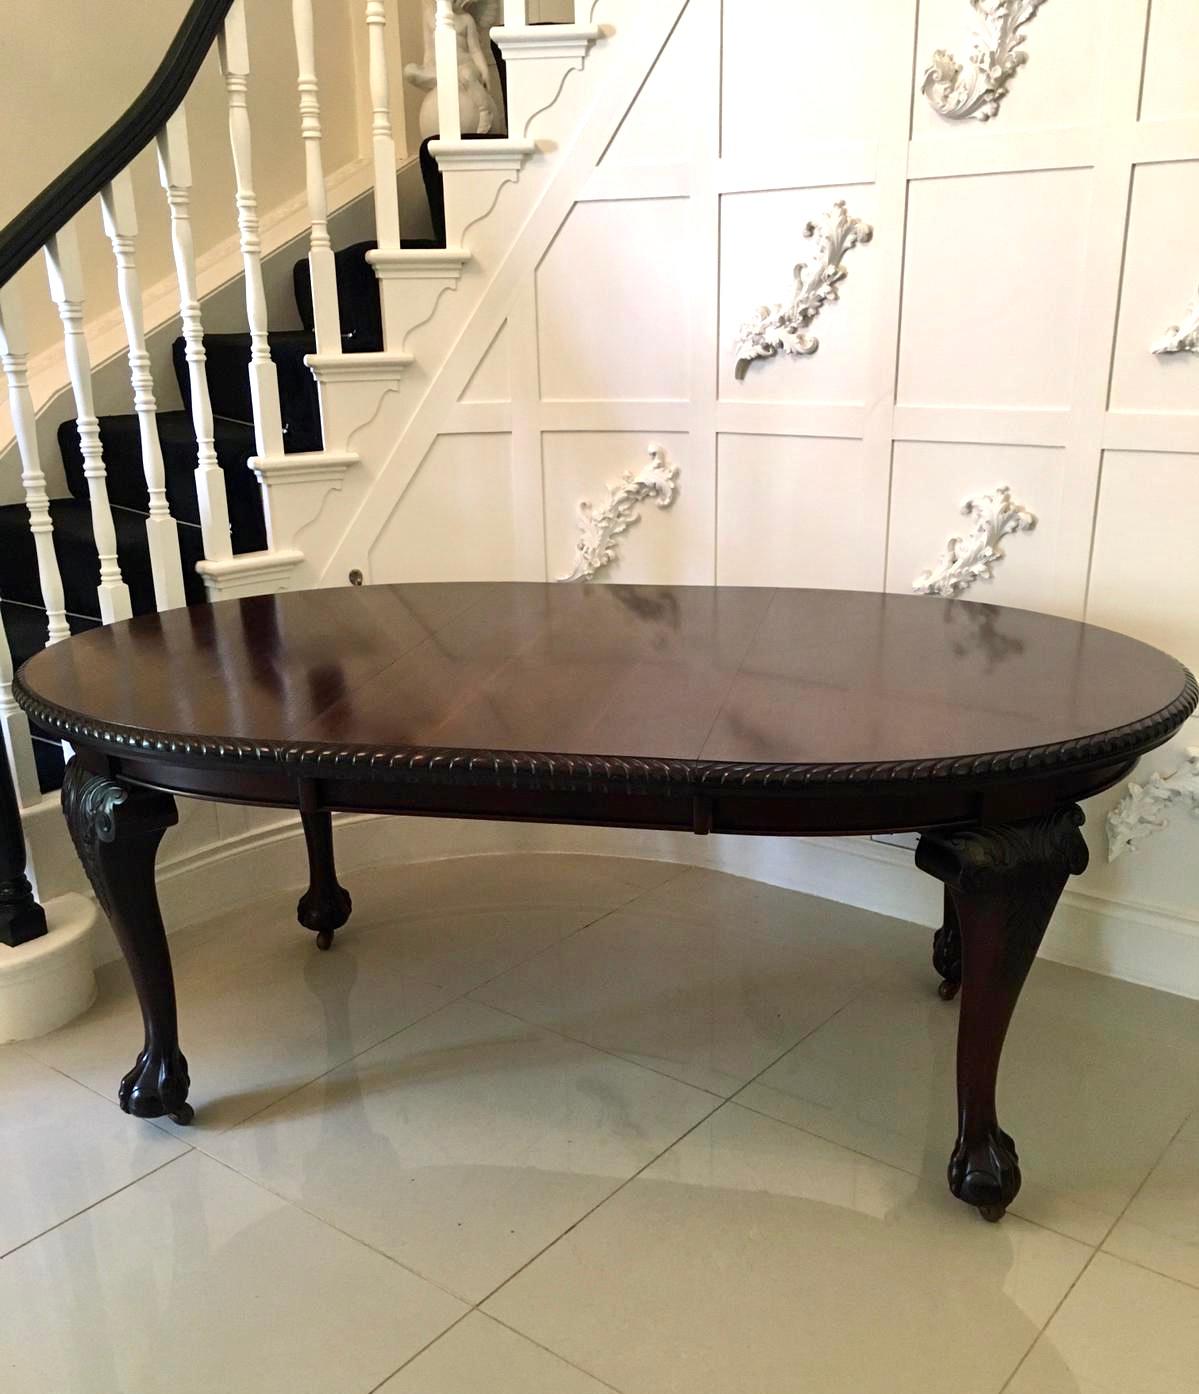 Fine quality 19th century antique Victorian mahogany extending dining table which boasts a superior oval mahogany top with a quality carved edge and oval mahogany frieze. It has the original extra leaf with the same carved edge and frieze. The